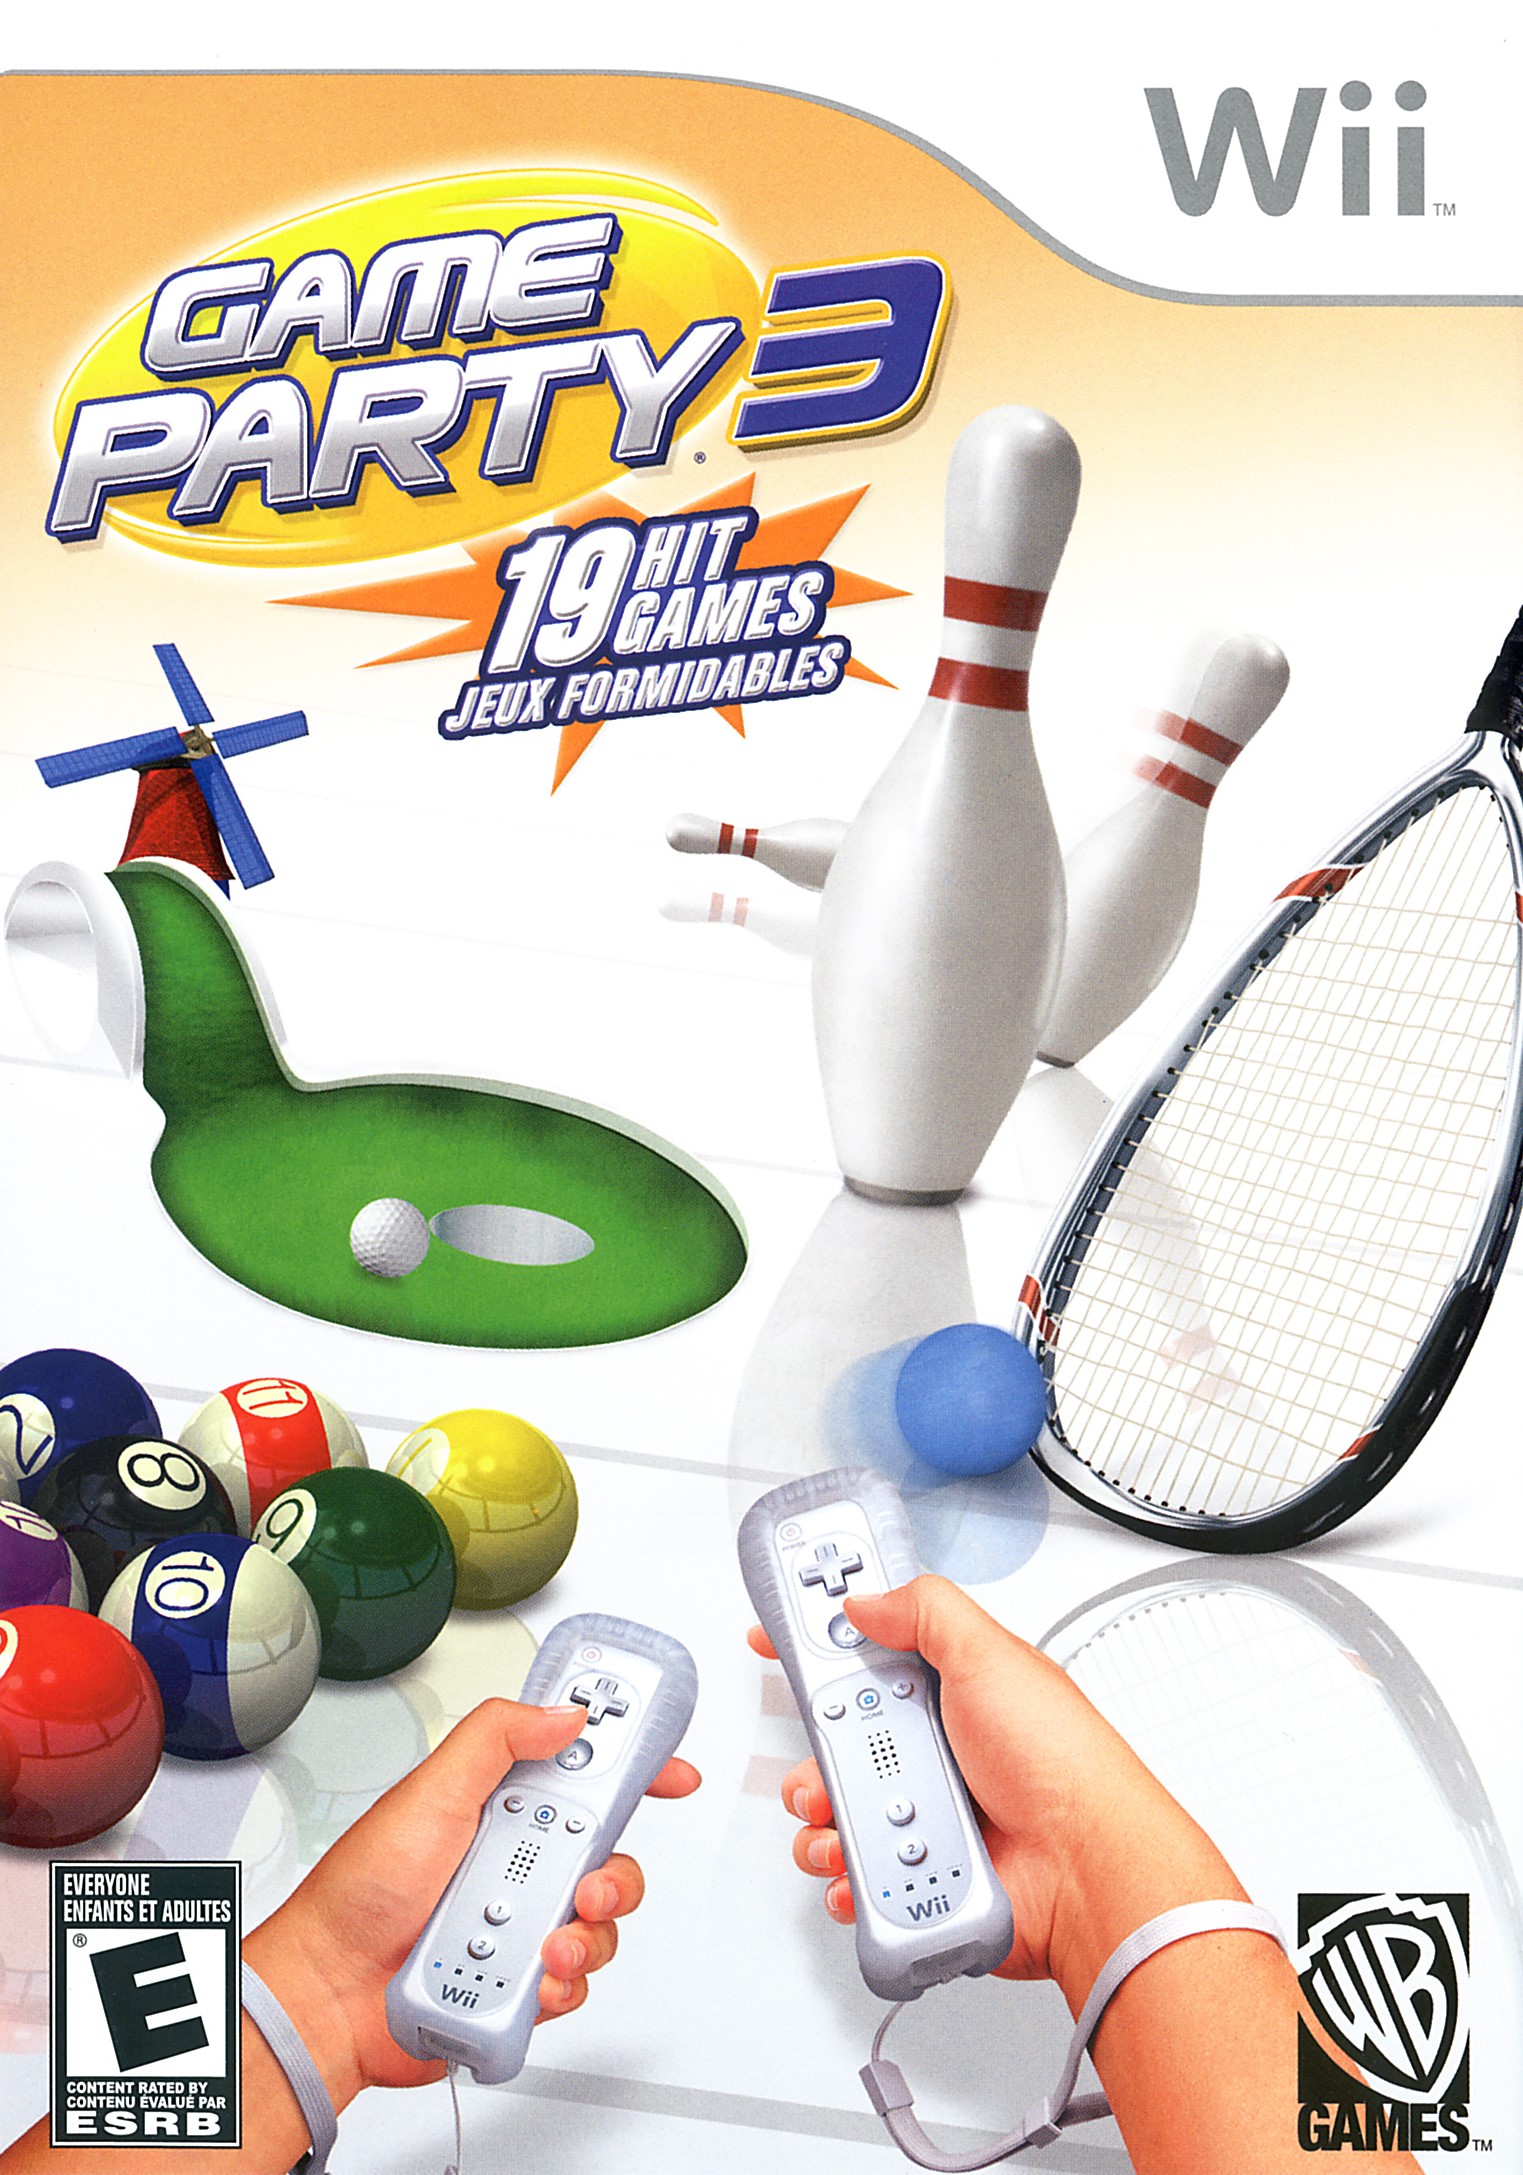 'Game Party 3'